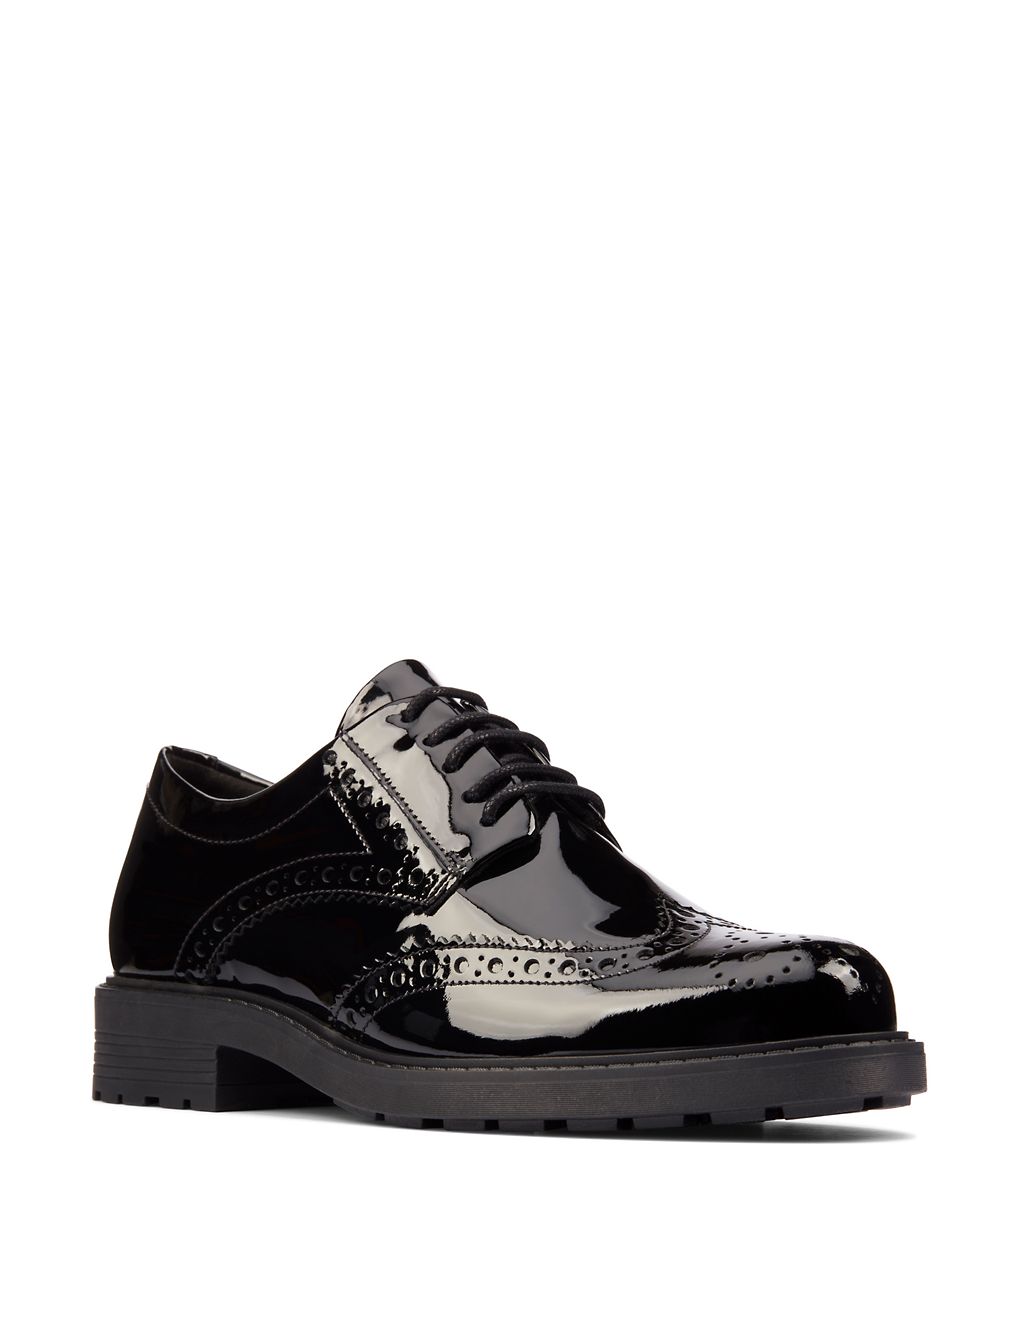 Leather Patent Lace Up Brogues | CLARKS | M&S